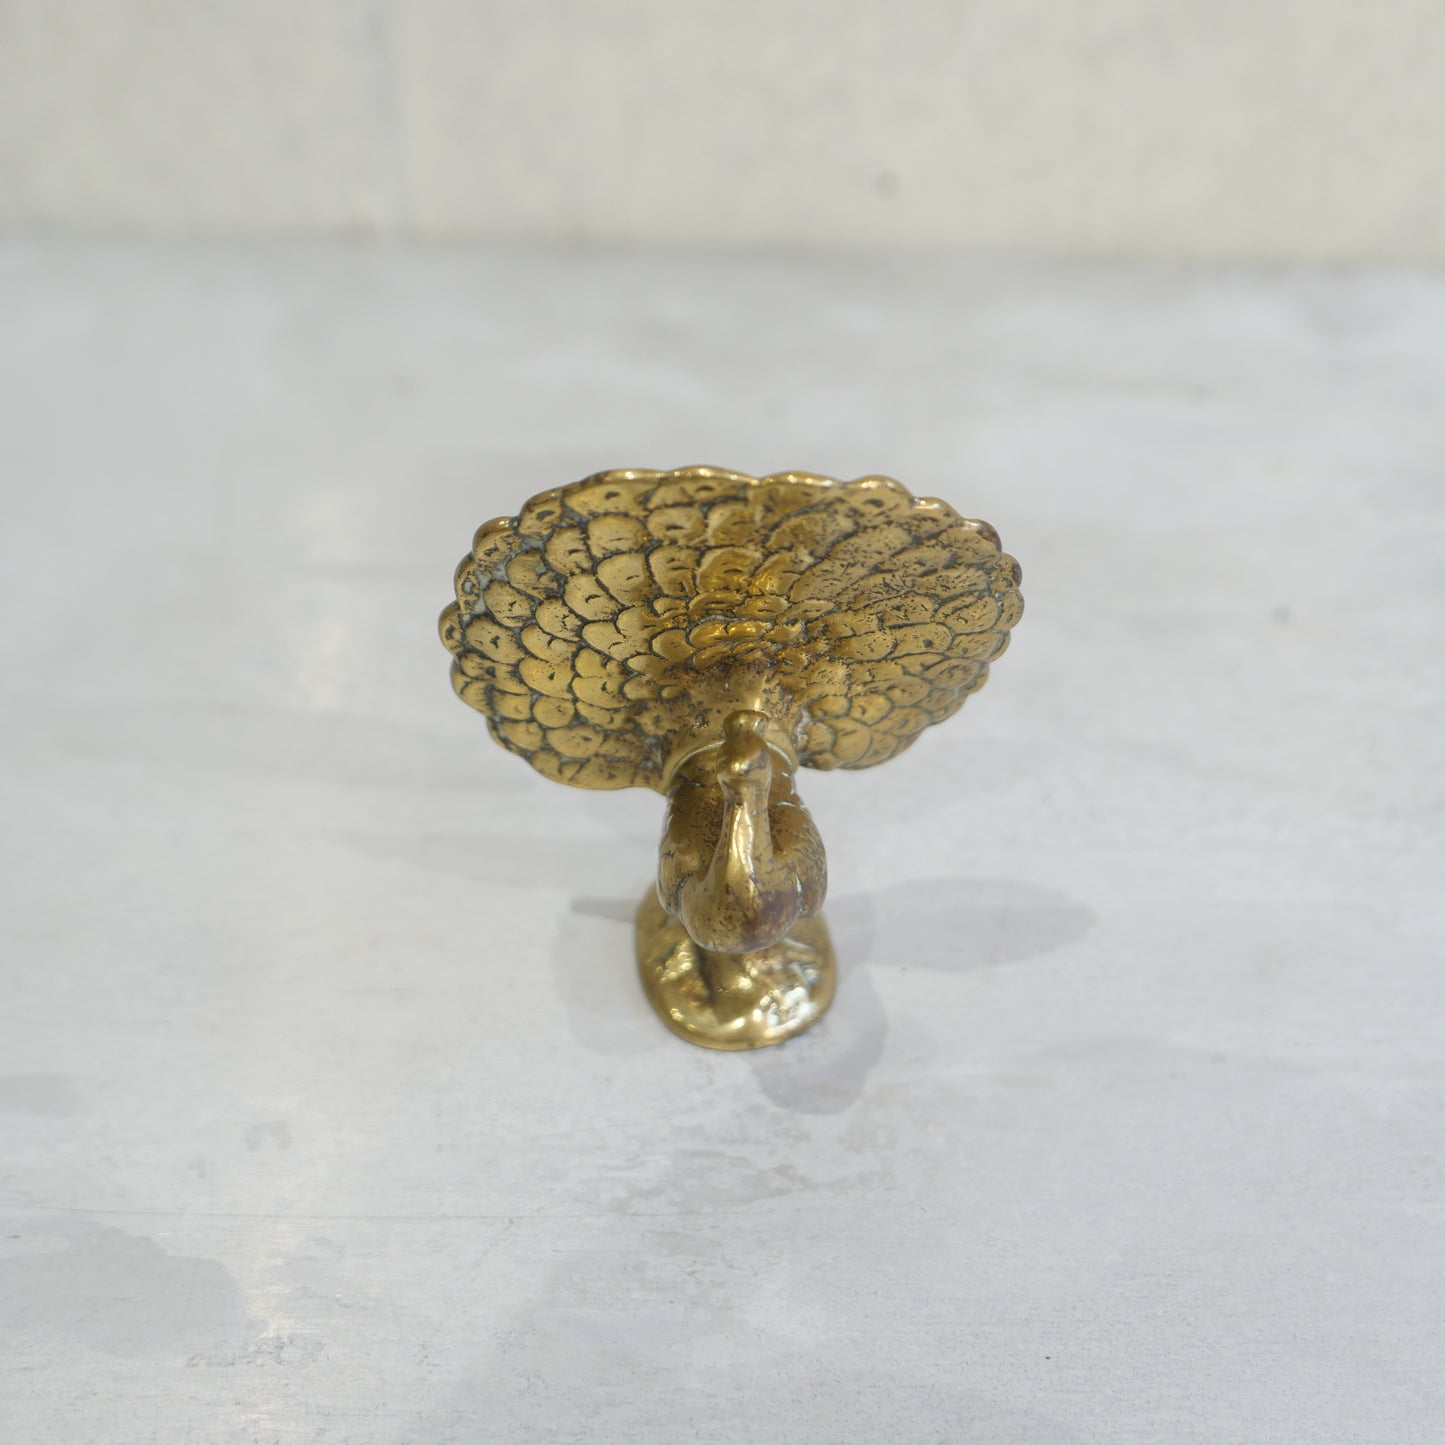 Vintage Brass Peacock Ornament or Paperweight 1950s